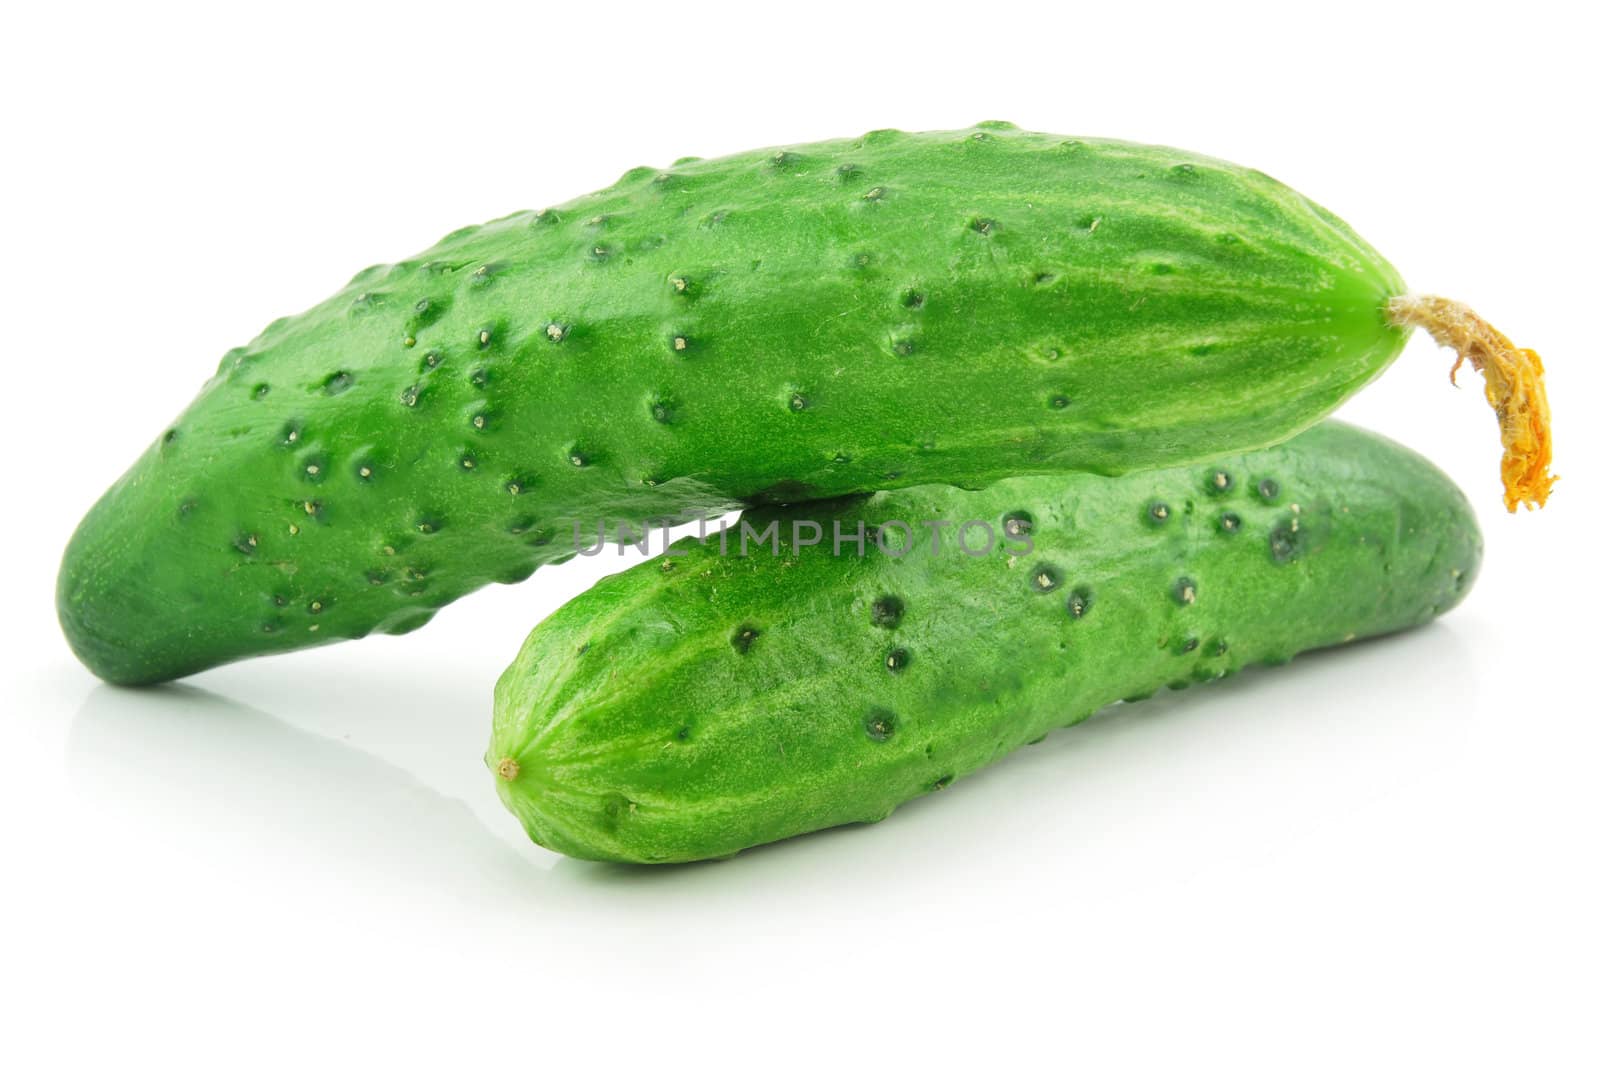 Ripe Cucumbers Isolated on White by alphacell